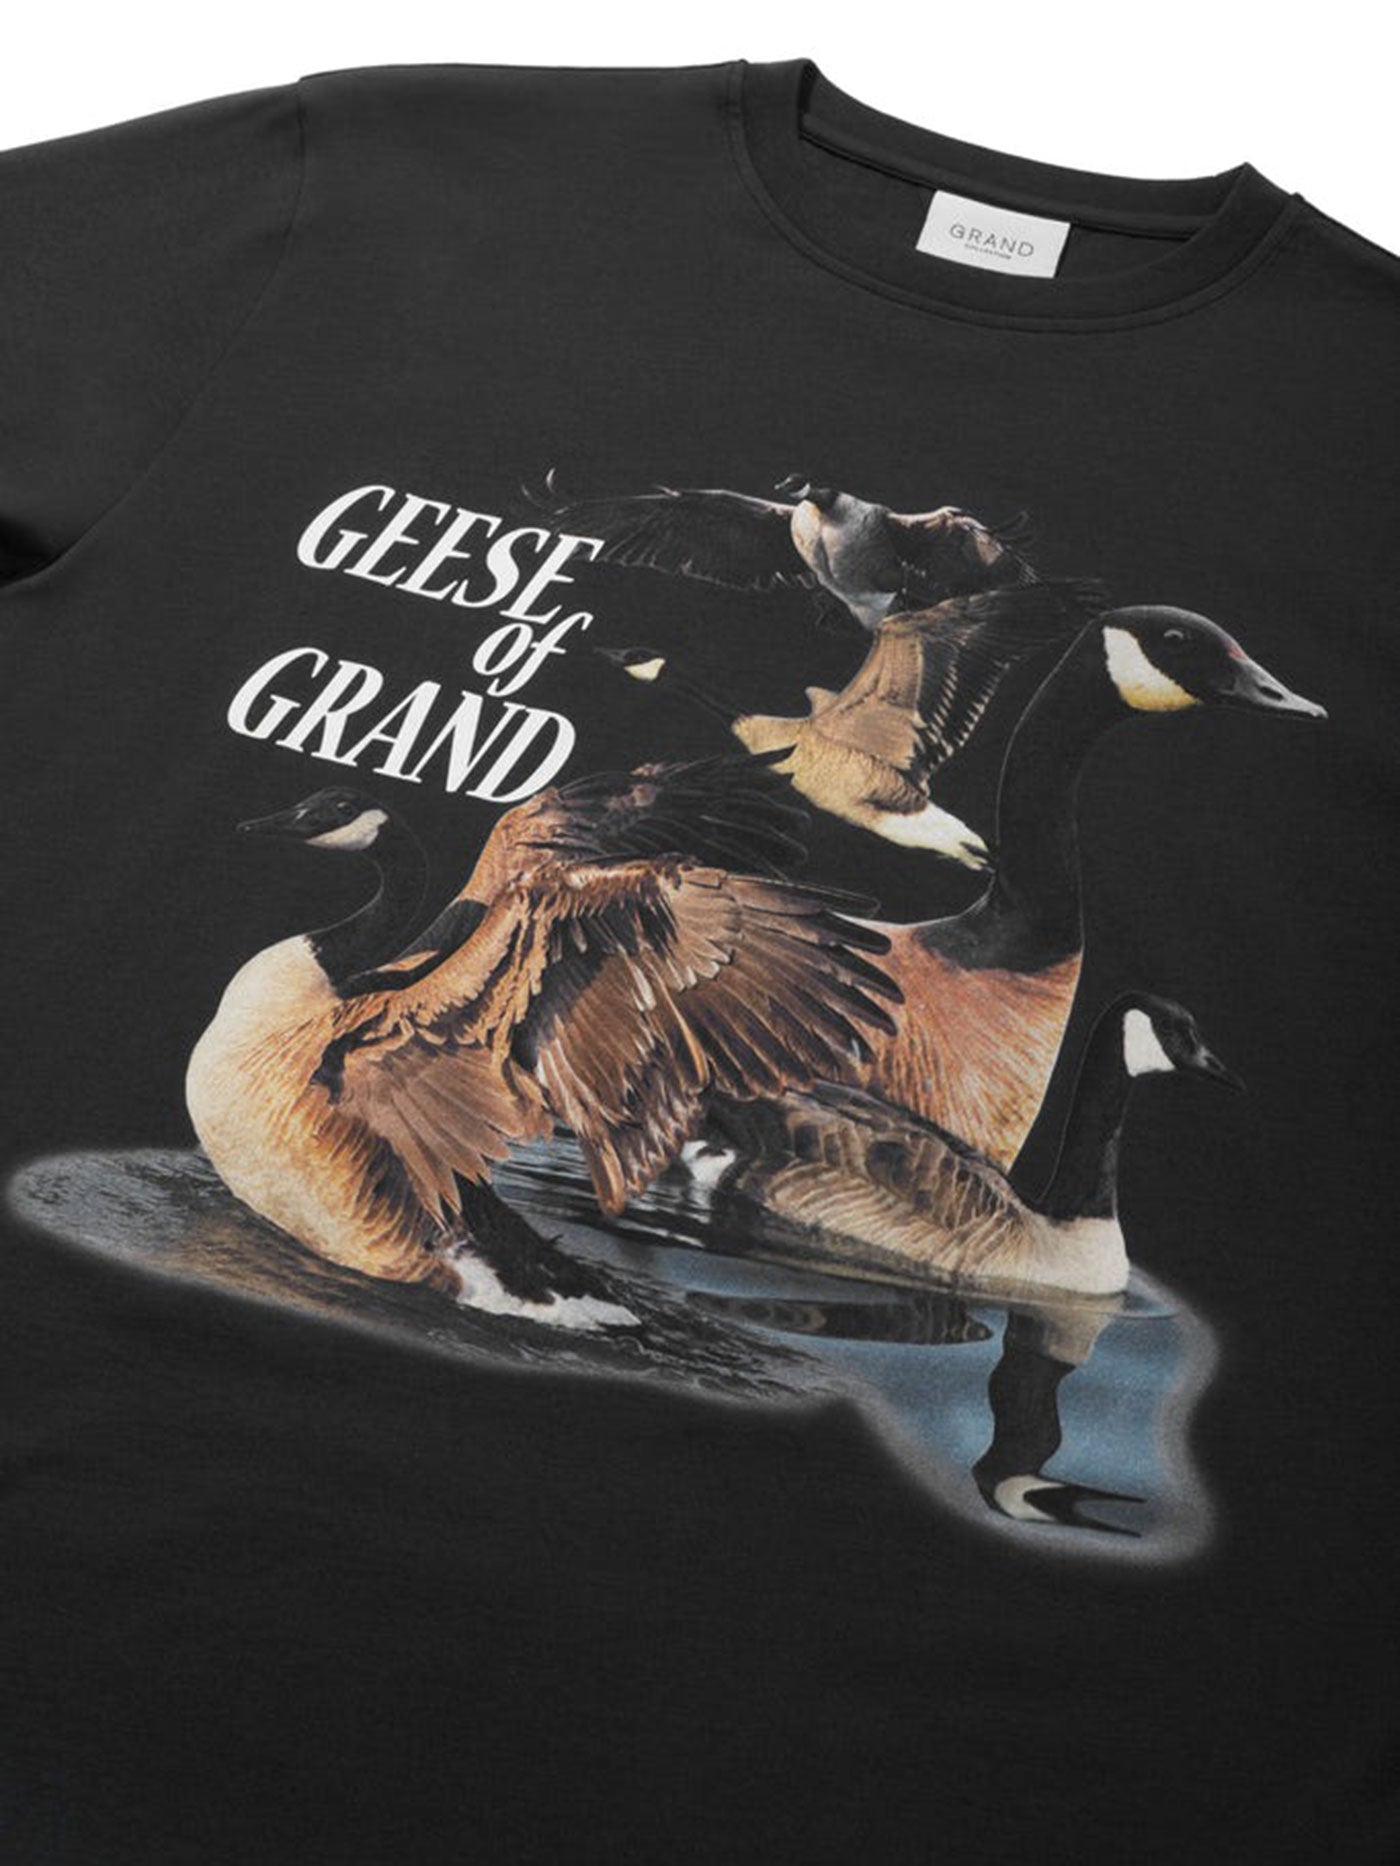 Grand Geese of Grand T-Shirt Spring 2024